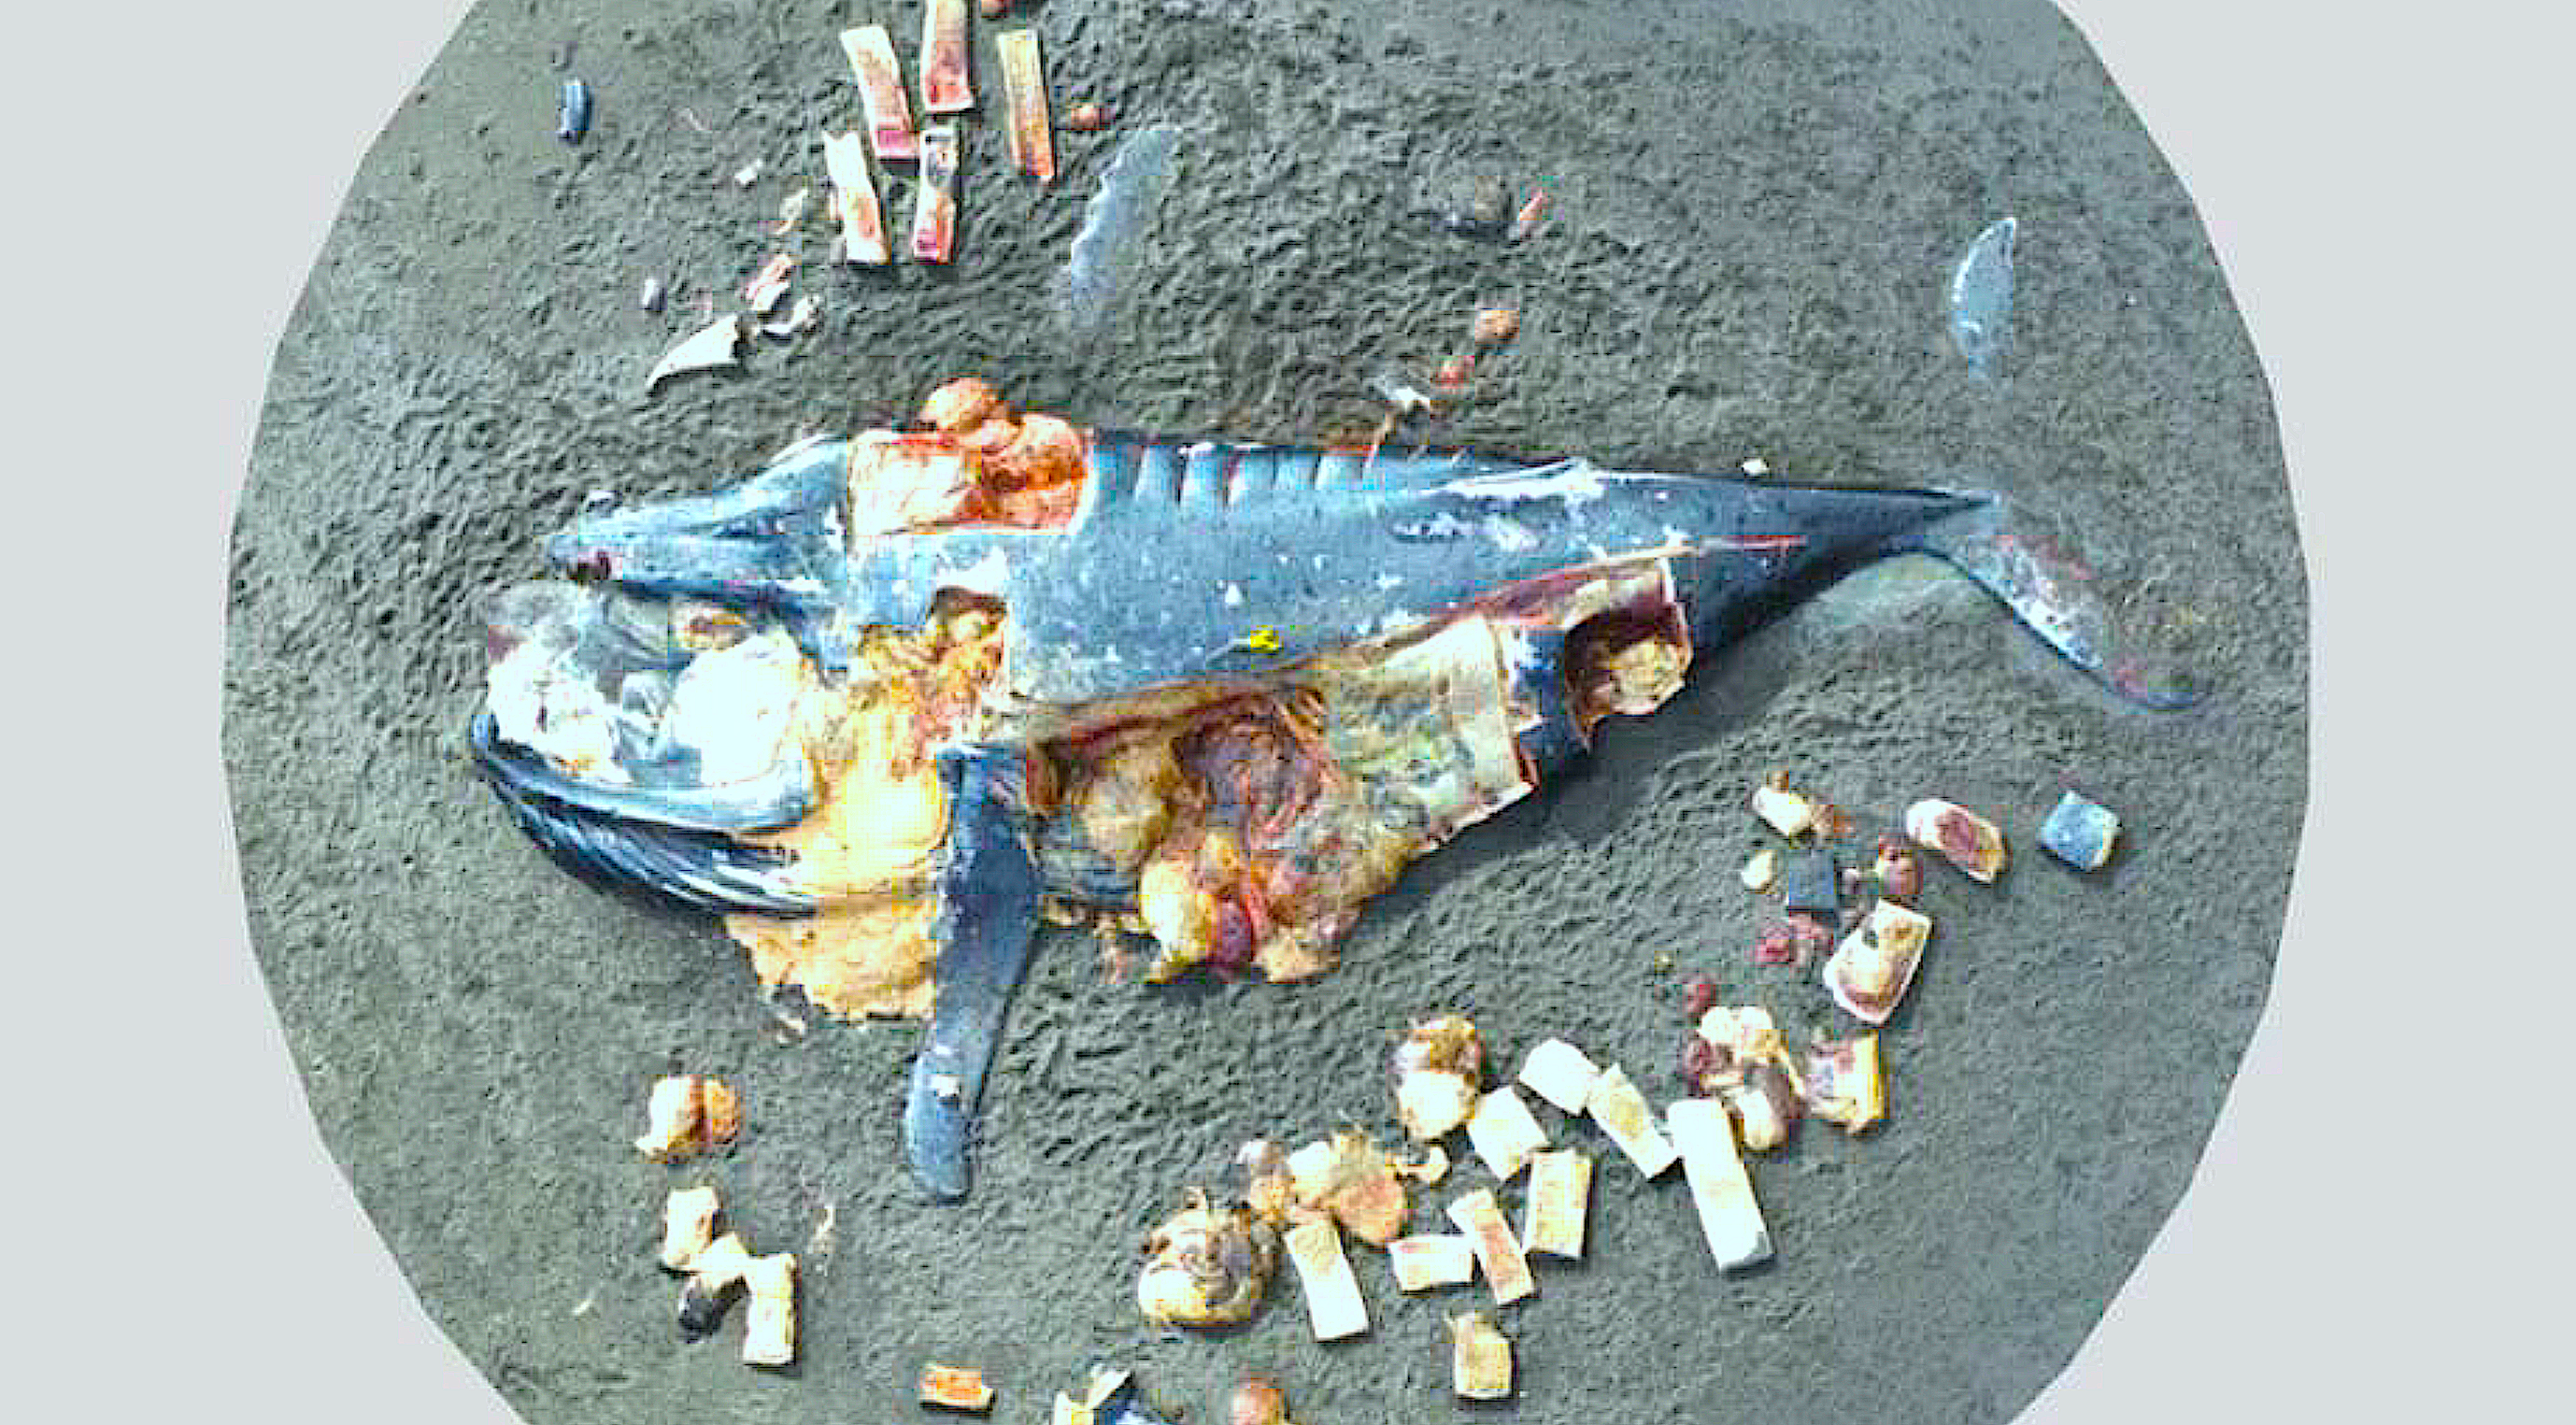 image from a whale necropsy.